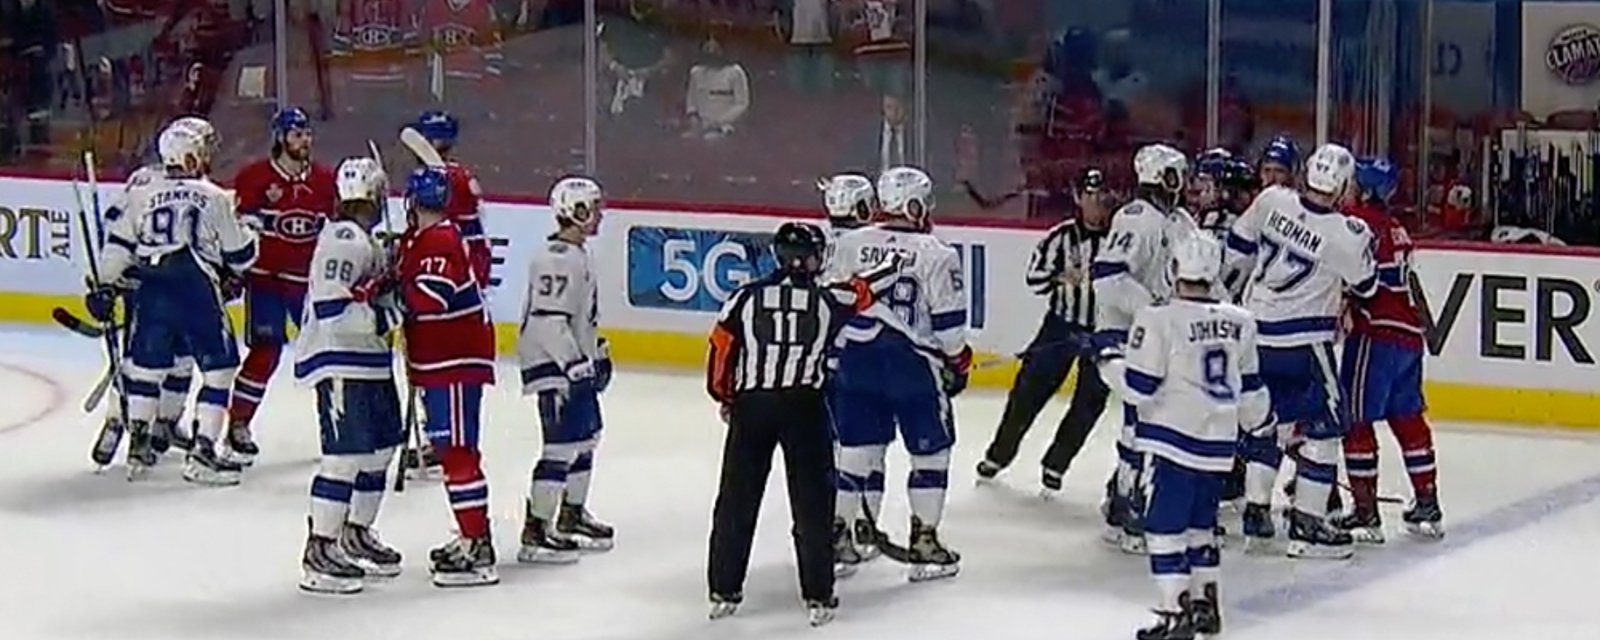 Both benches empty as tempers flare in Game 4